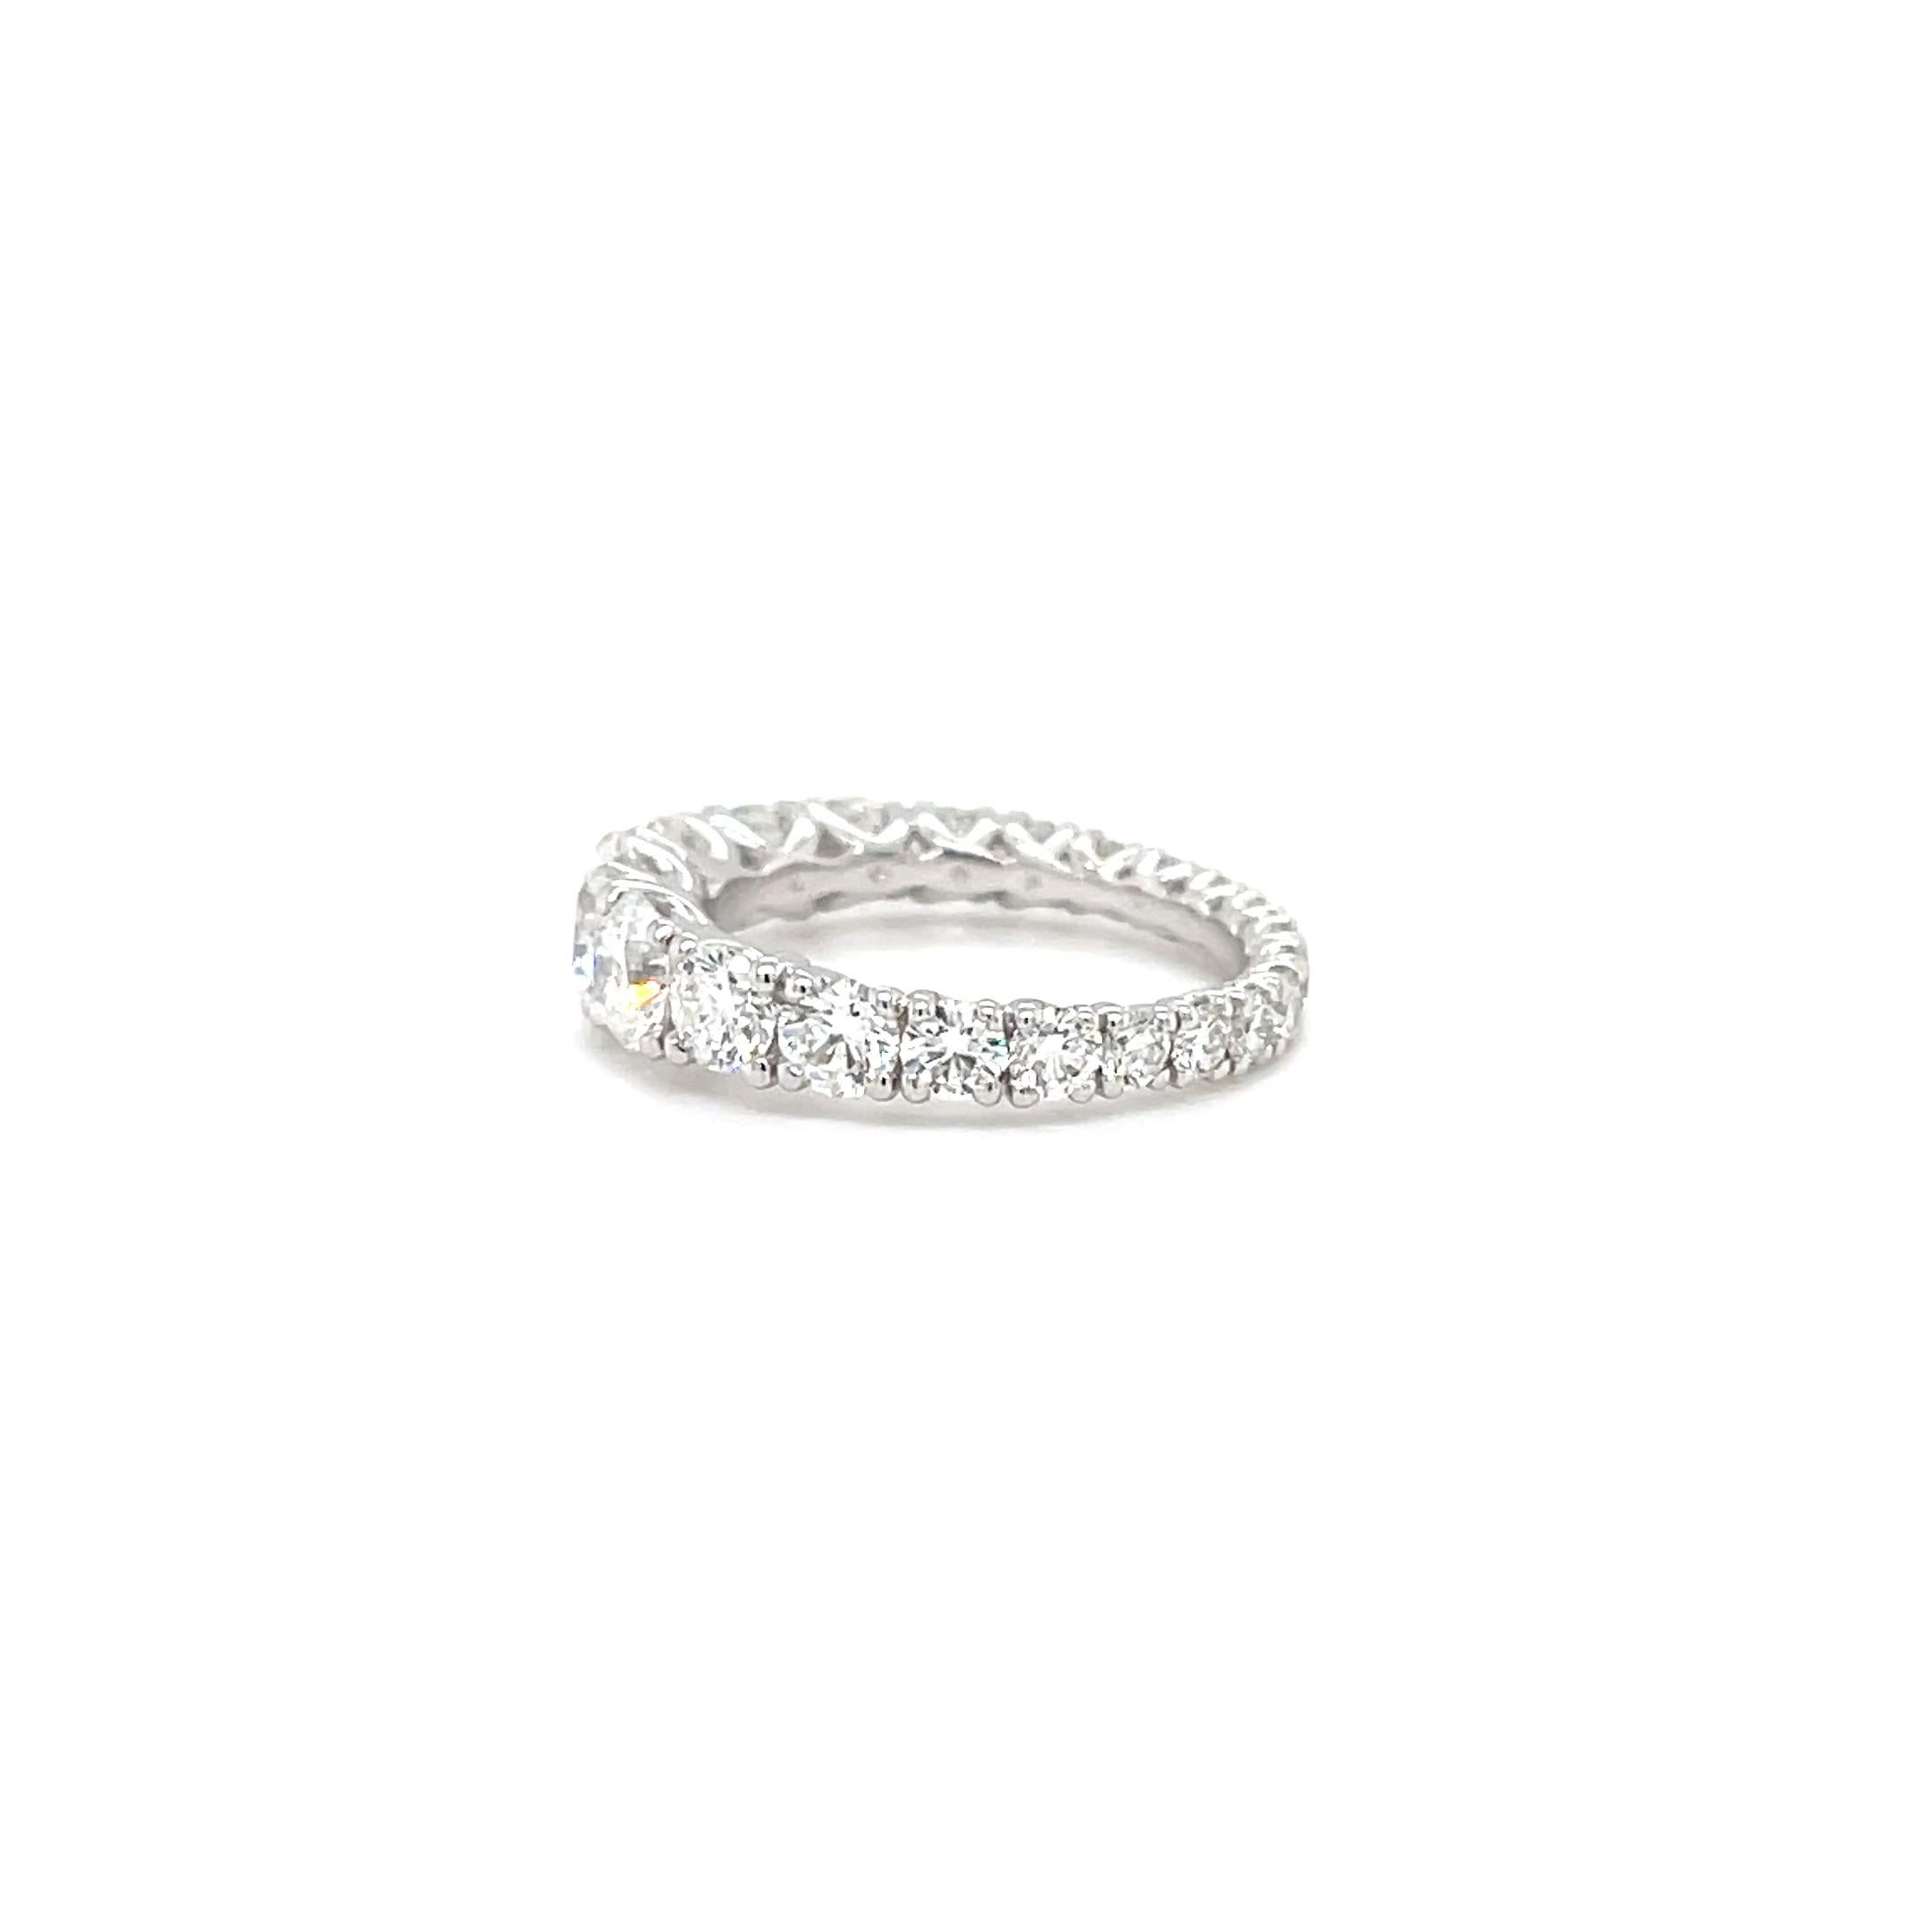 Embrace Everlasting Brilliance: GIA Certified 3.18 CTW Eternity Diamond Ring

This exquisite eternity ring isn't just an adornment; it's a symbol of love and commitment, eternally adorned with the mesmerizing dance of diamonds.

Uniquely Enduring: